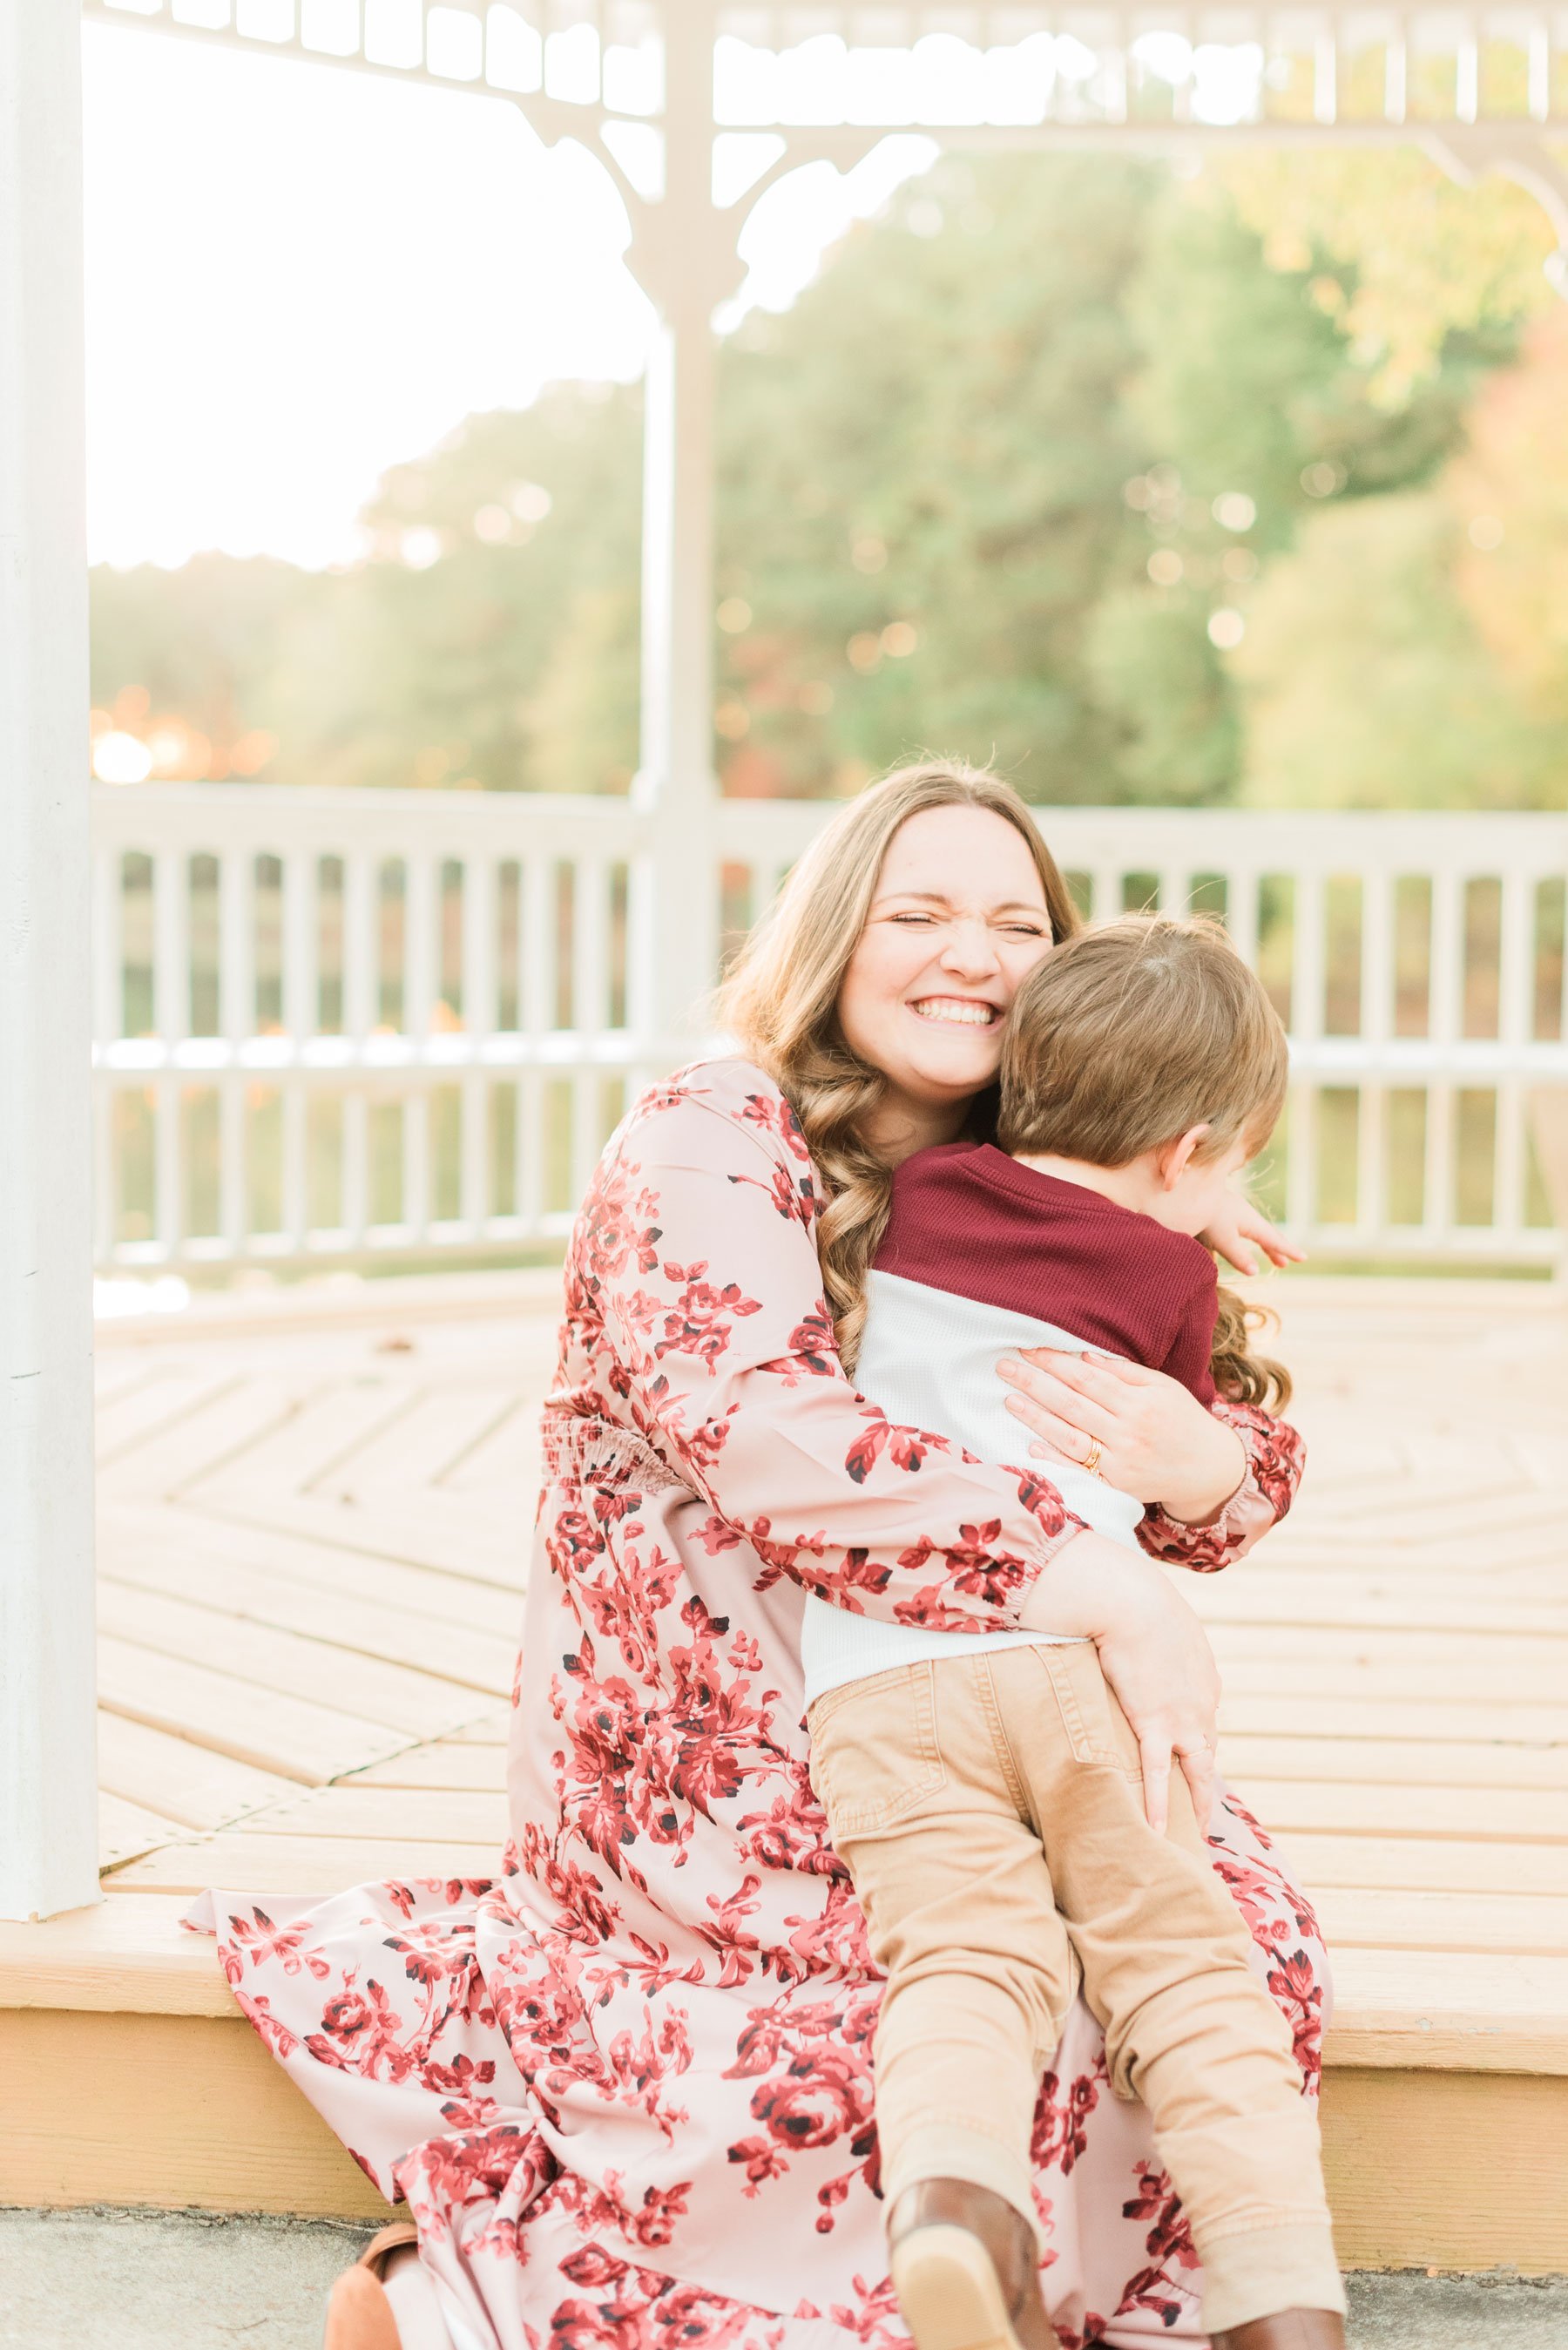  A mother wearing a floral pink and red dress gets a big hug from her two-year-old son in a gazebo in the fall. Georgia Maternity photos mother son hug&nbsp; #familymaterintyphotos #pregnacyphotoshoot #familyof3 #peachtreecity #atlantafamilyphotograp